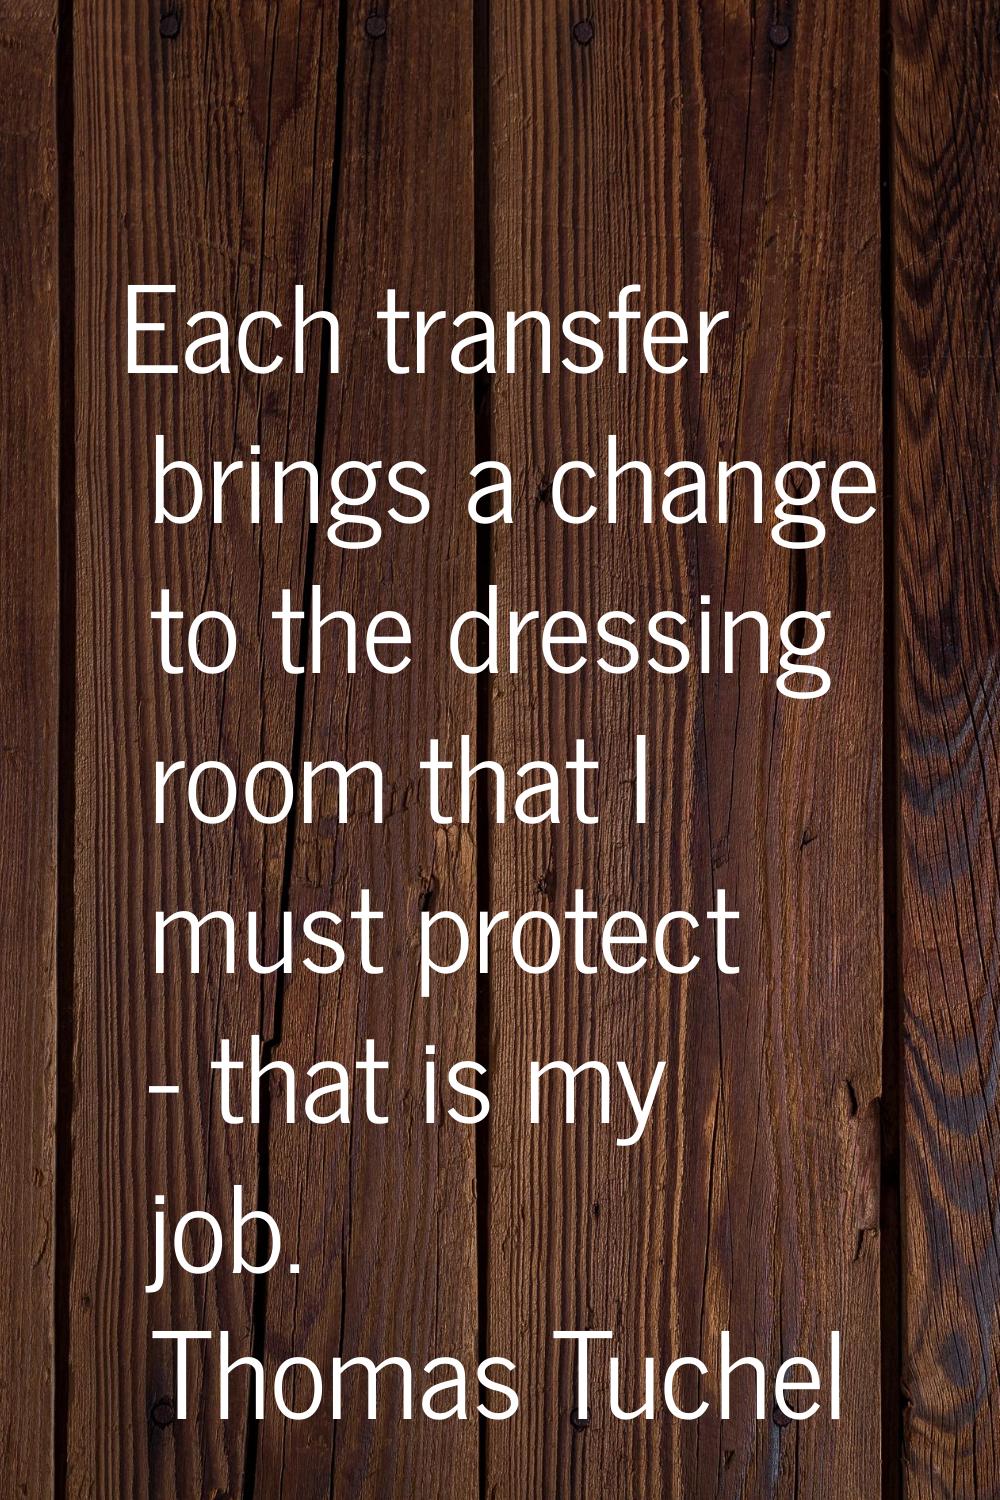 Each transfer brings a change to the dressing room that I must protect - that is my job.